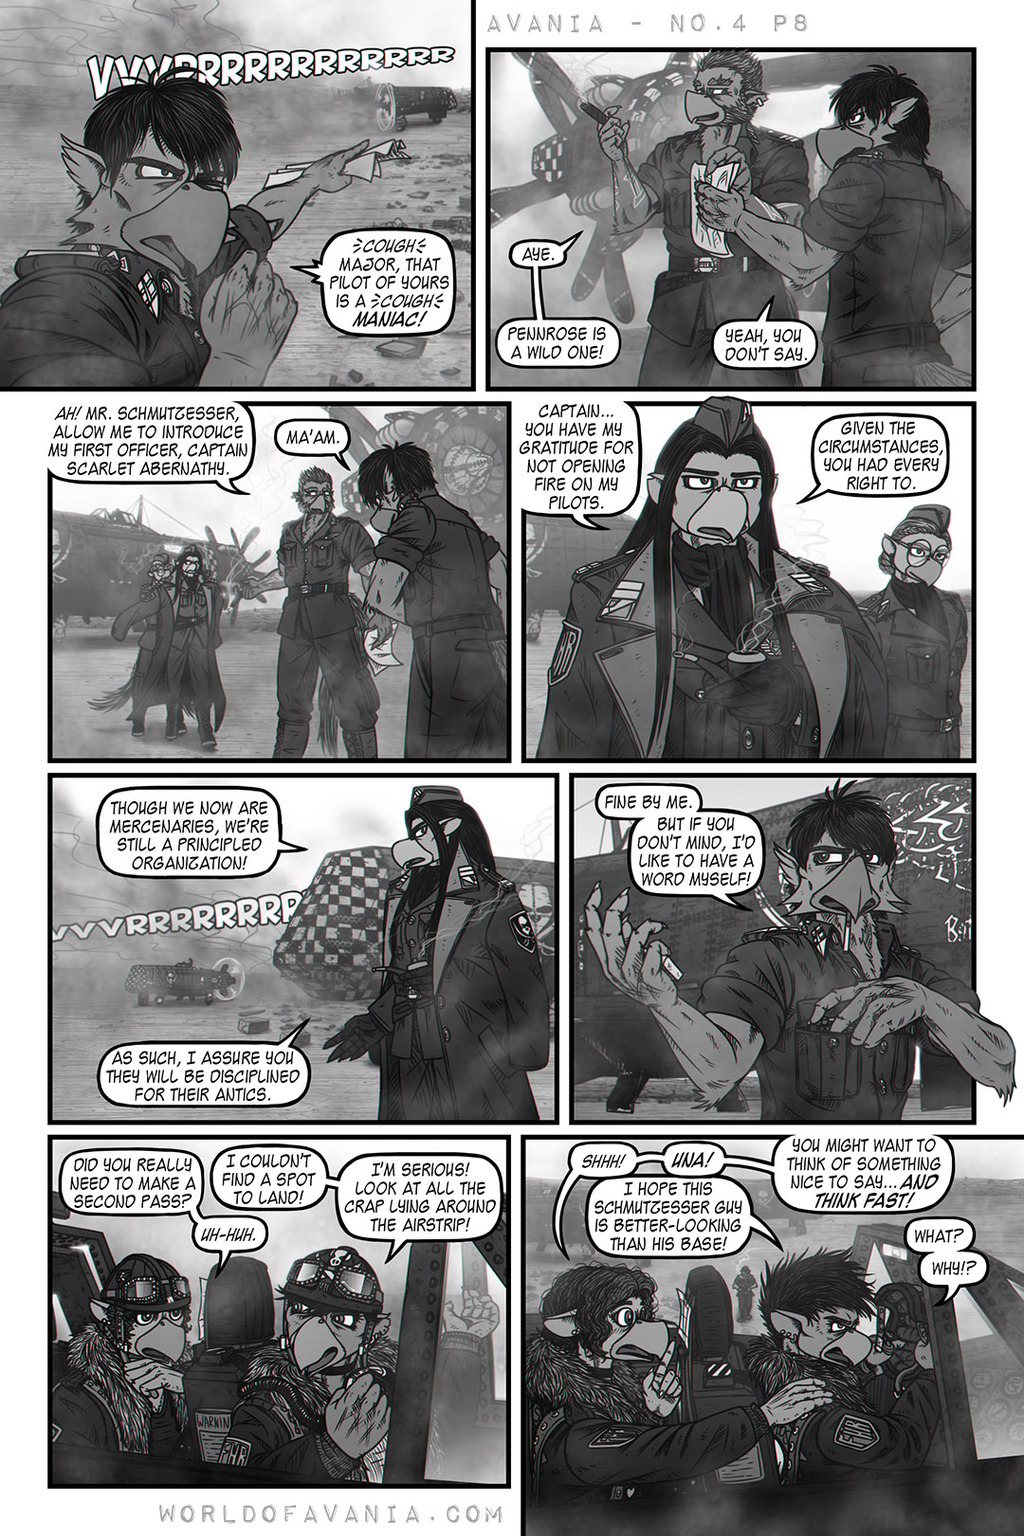 Avania Comic - Issue No.4, Page 8